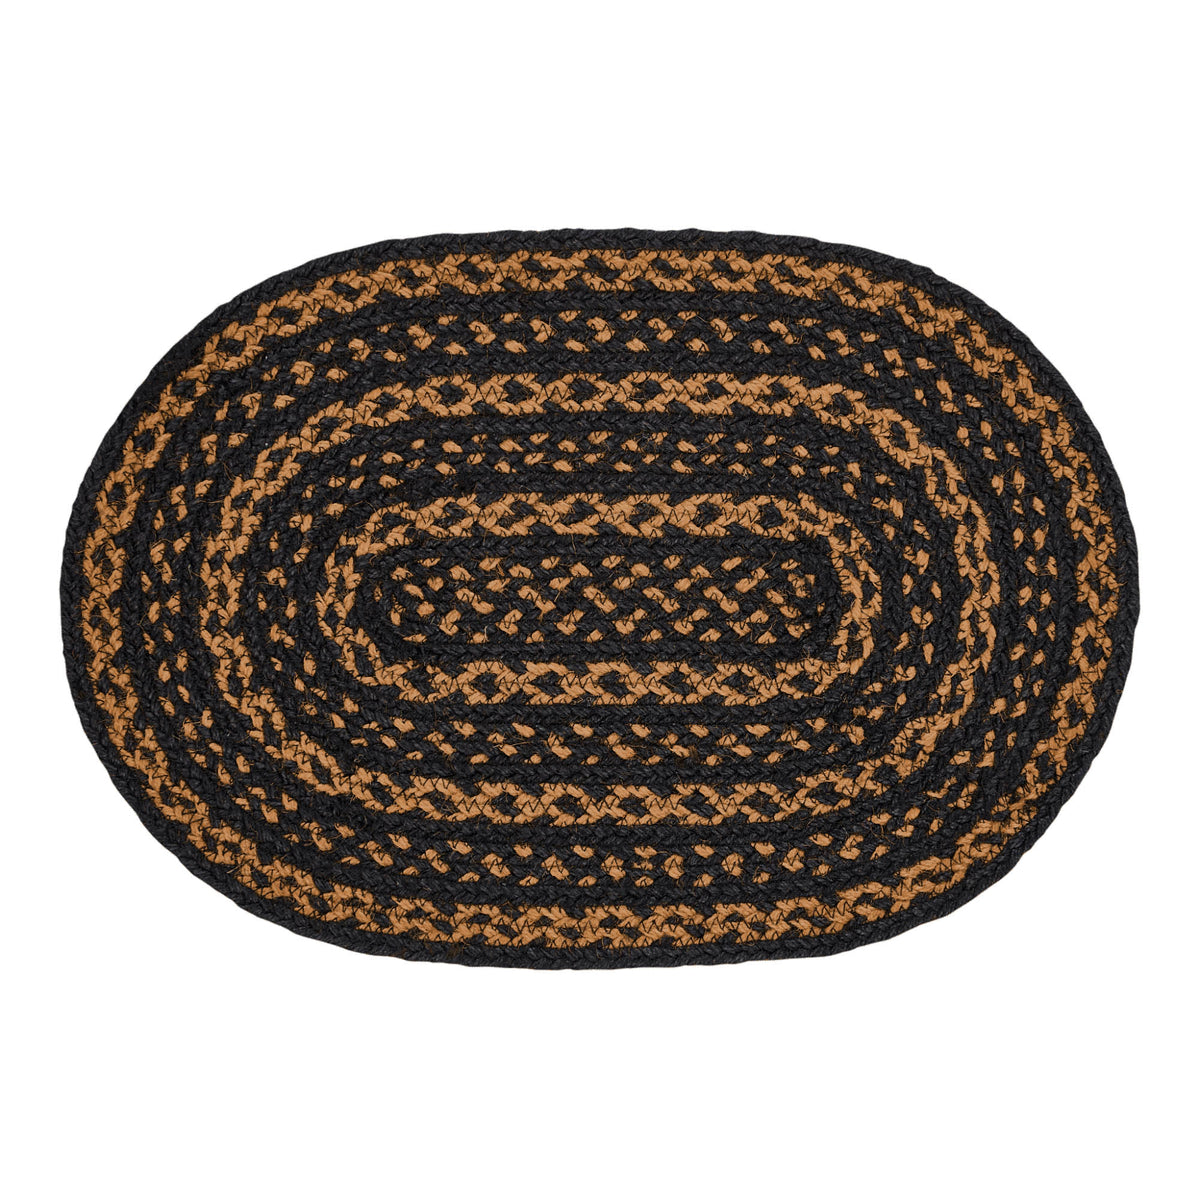 Mayflower Market Black & Tan Jute Oval Placemat 12x18 By VHC Brands